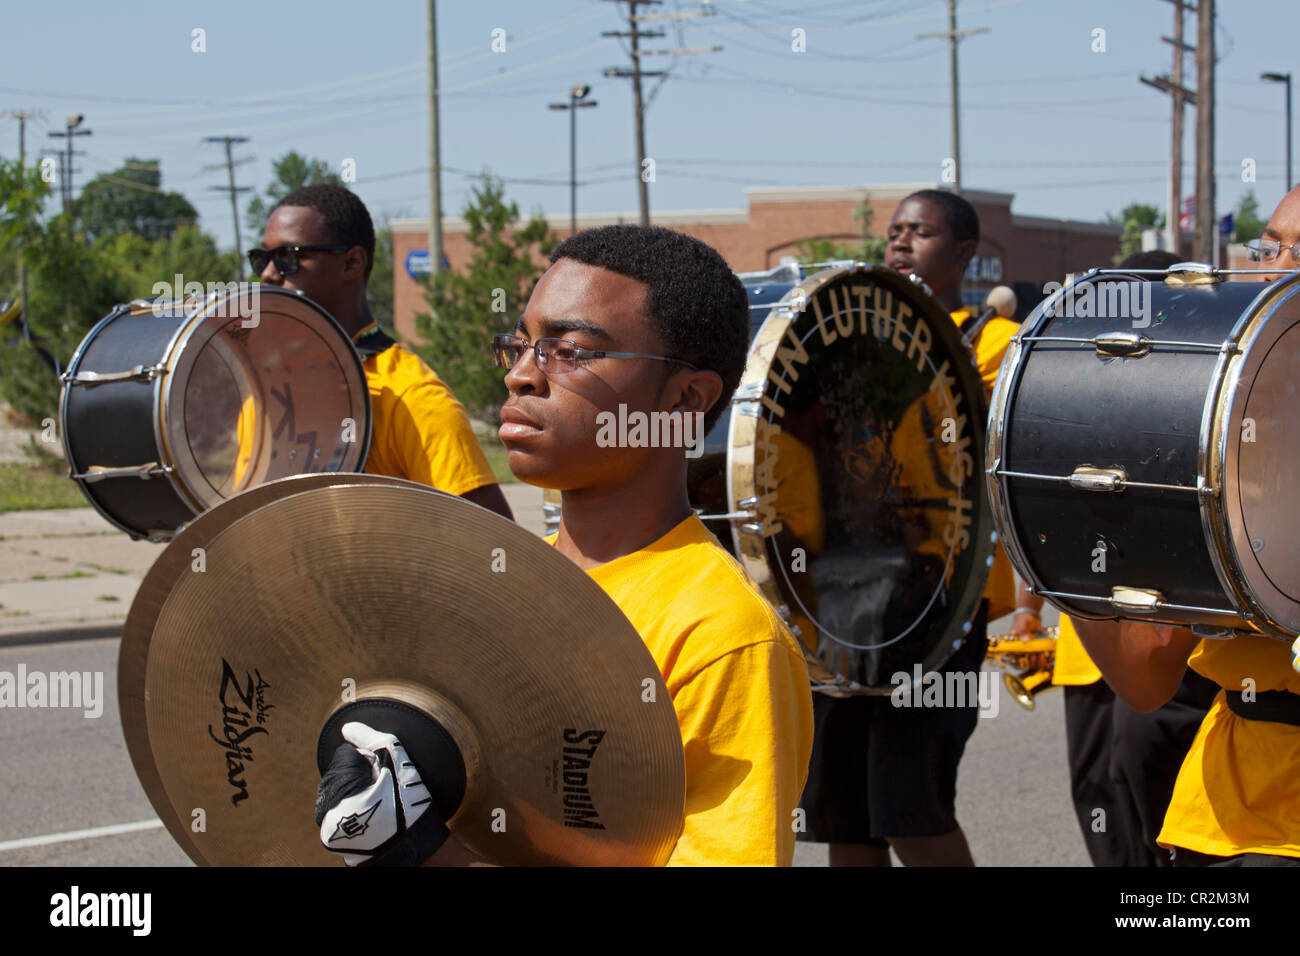 Der Martin Luther King High School Marching Band Stockfoto